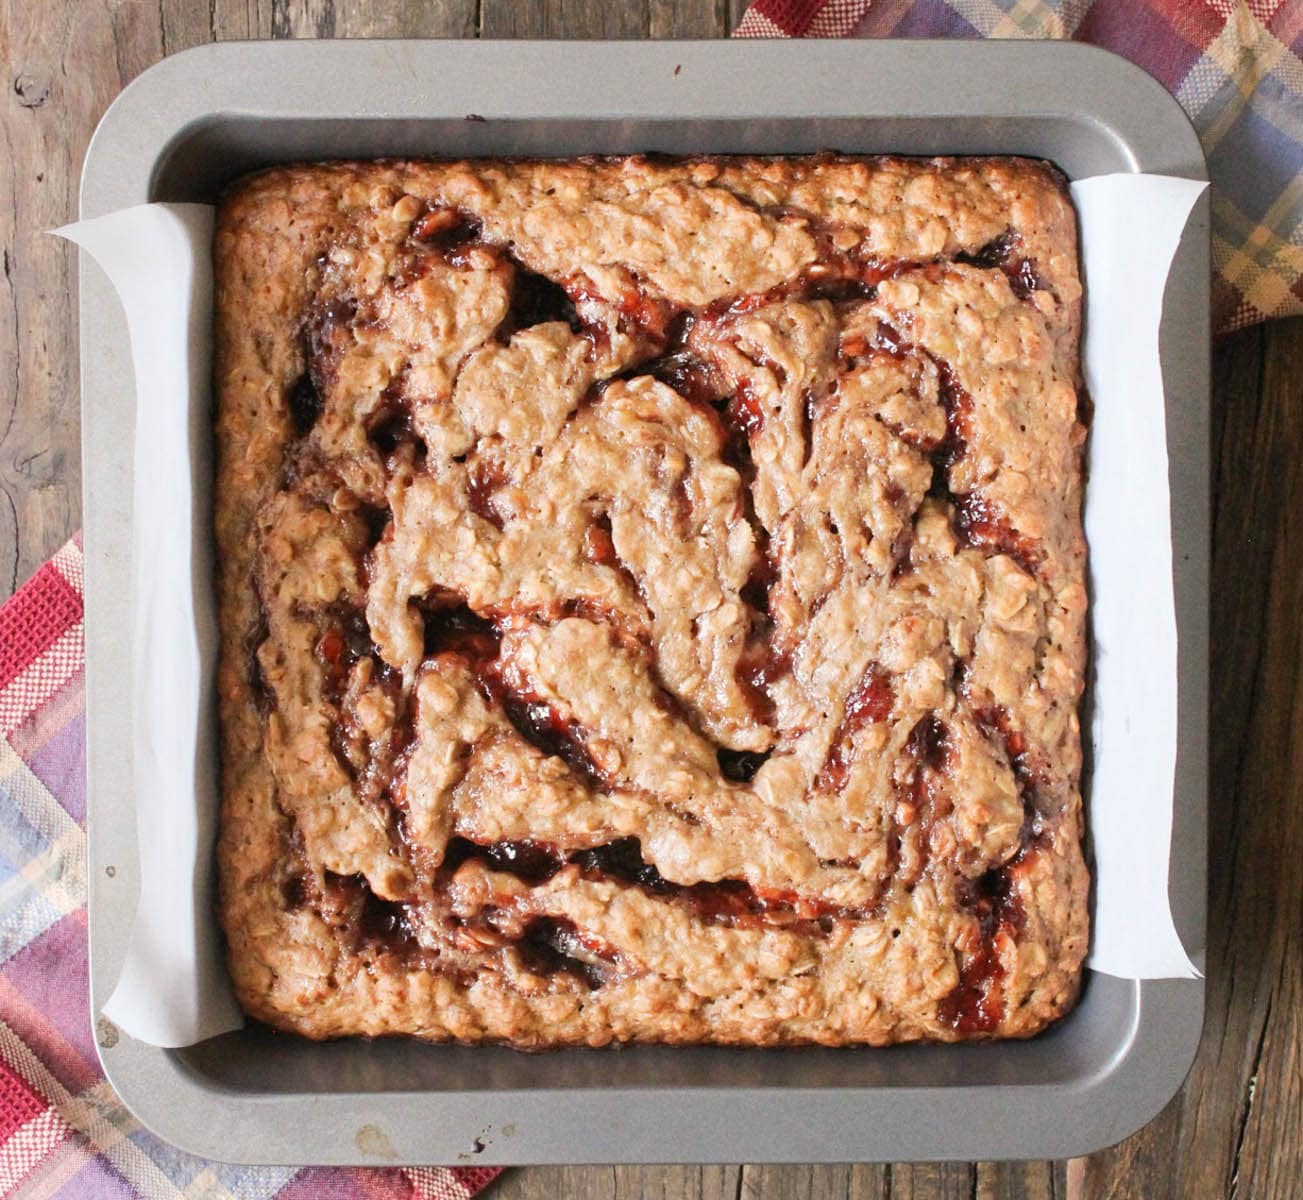 Peanut-Butter-and-Jelly-Snack-Cake-Step-8